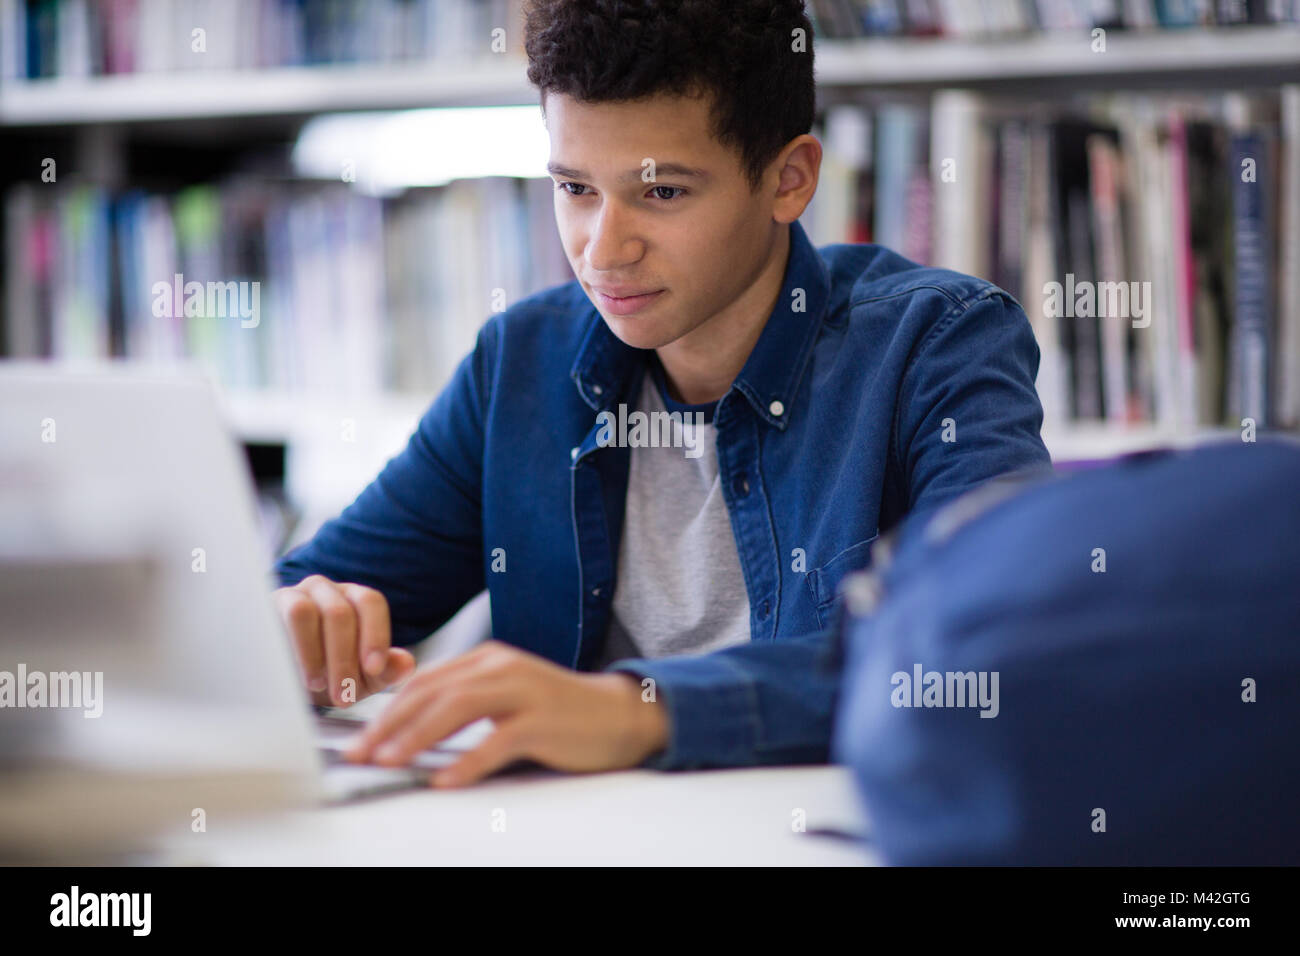 Student working on laptop in library Stock Photo